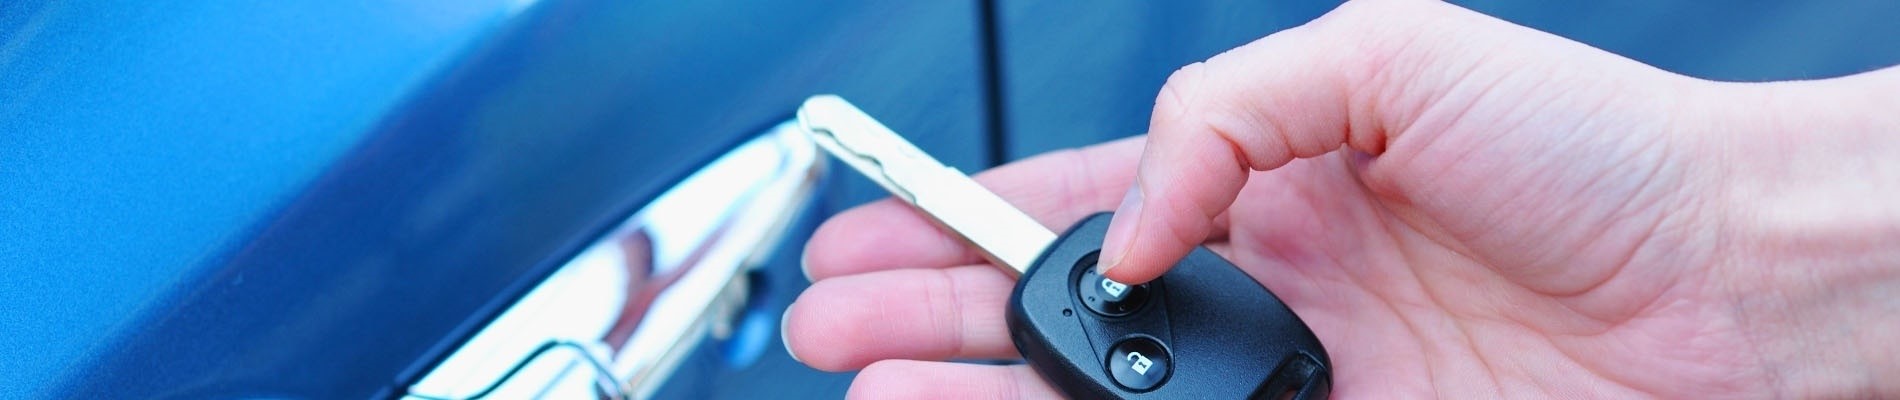 Locked out of your car or need a new car key replacement? Call us